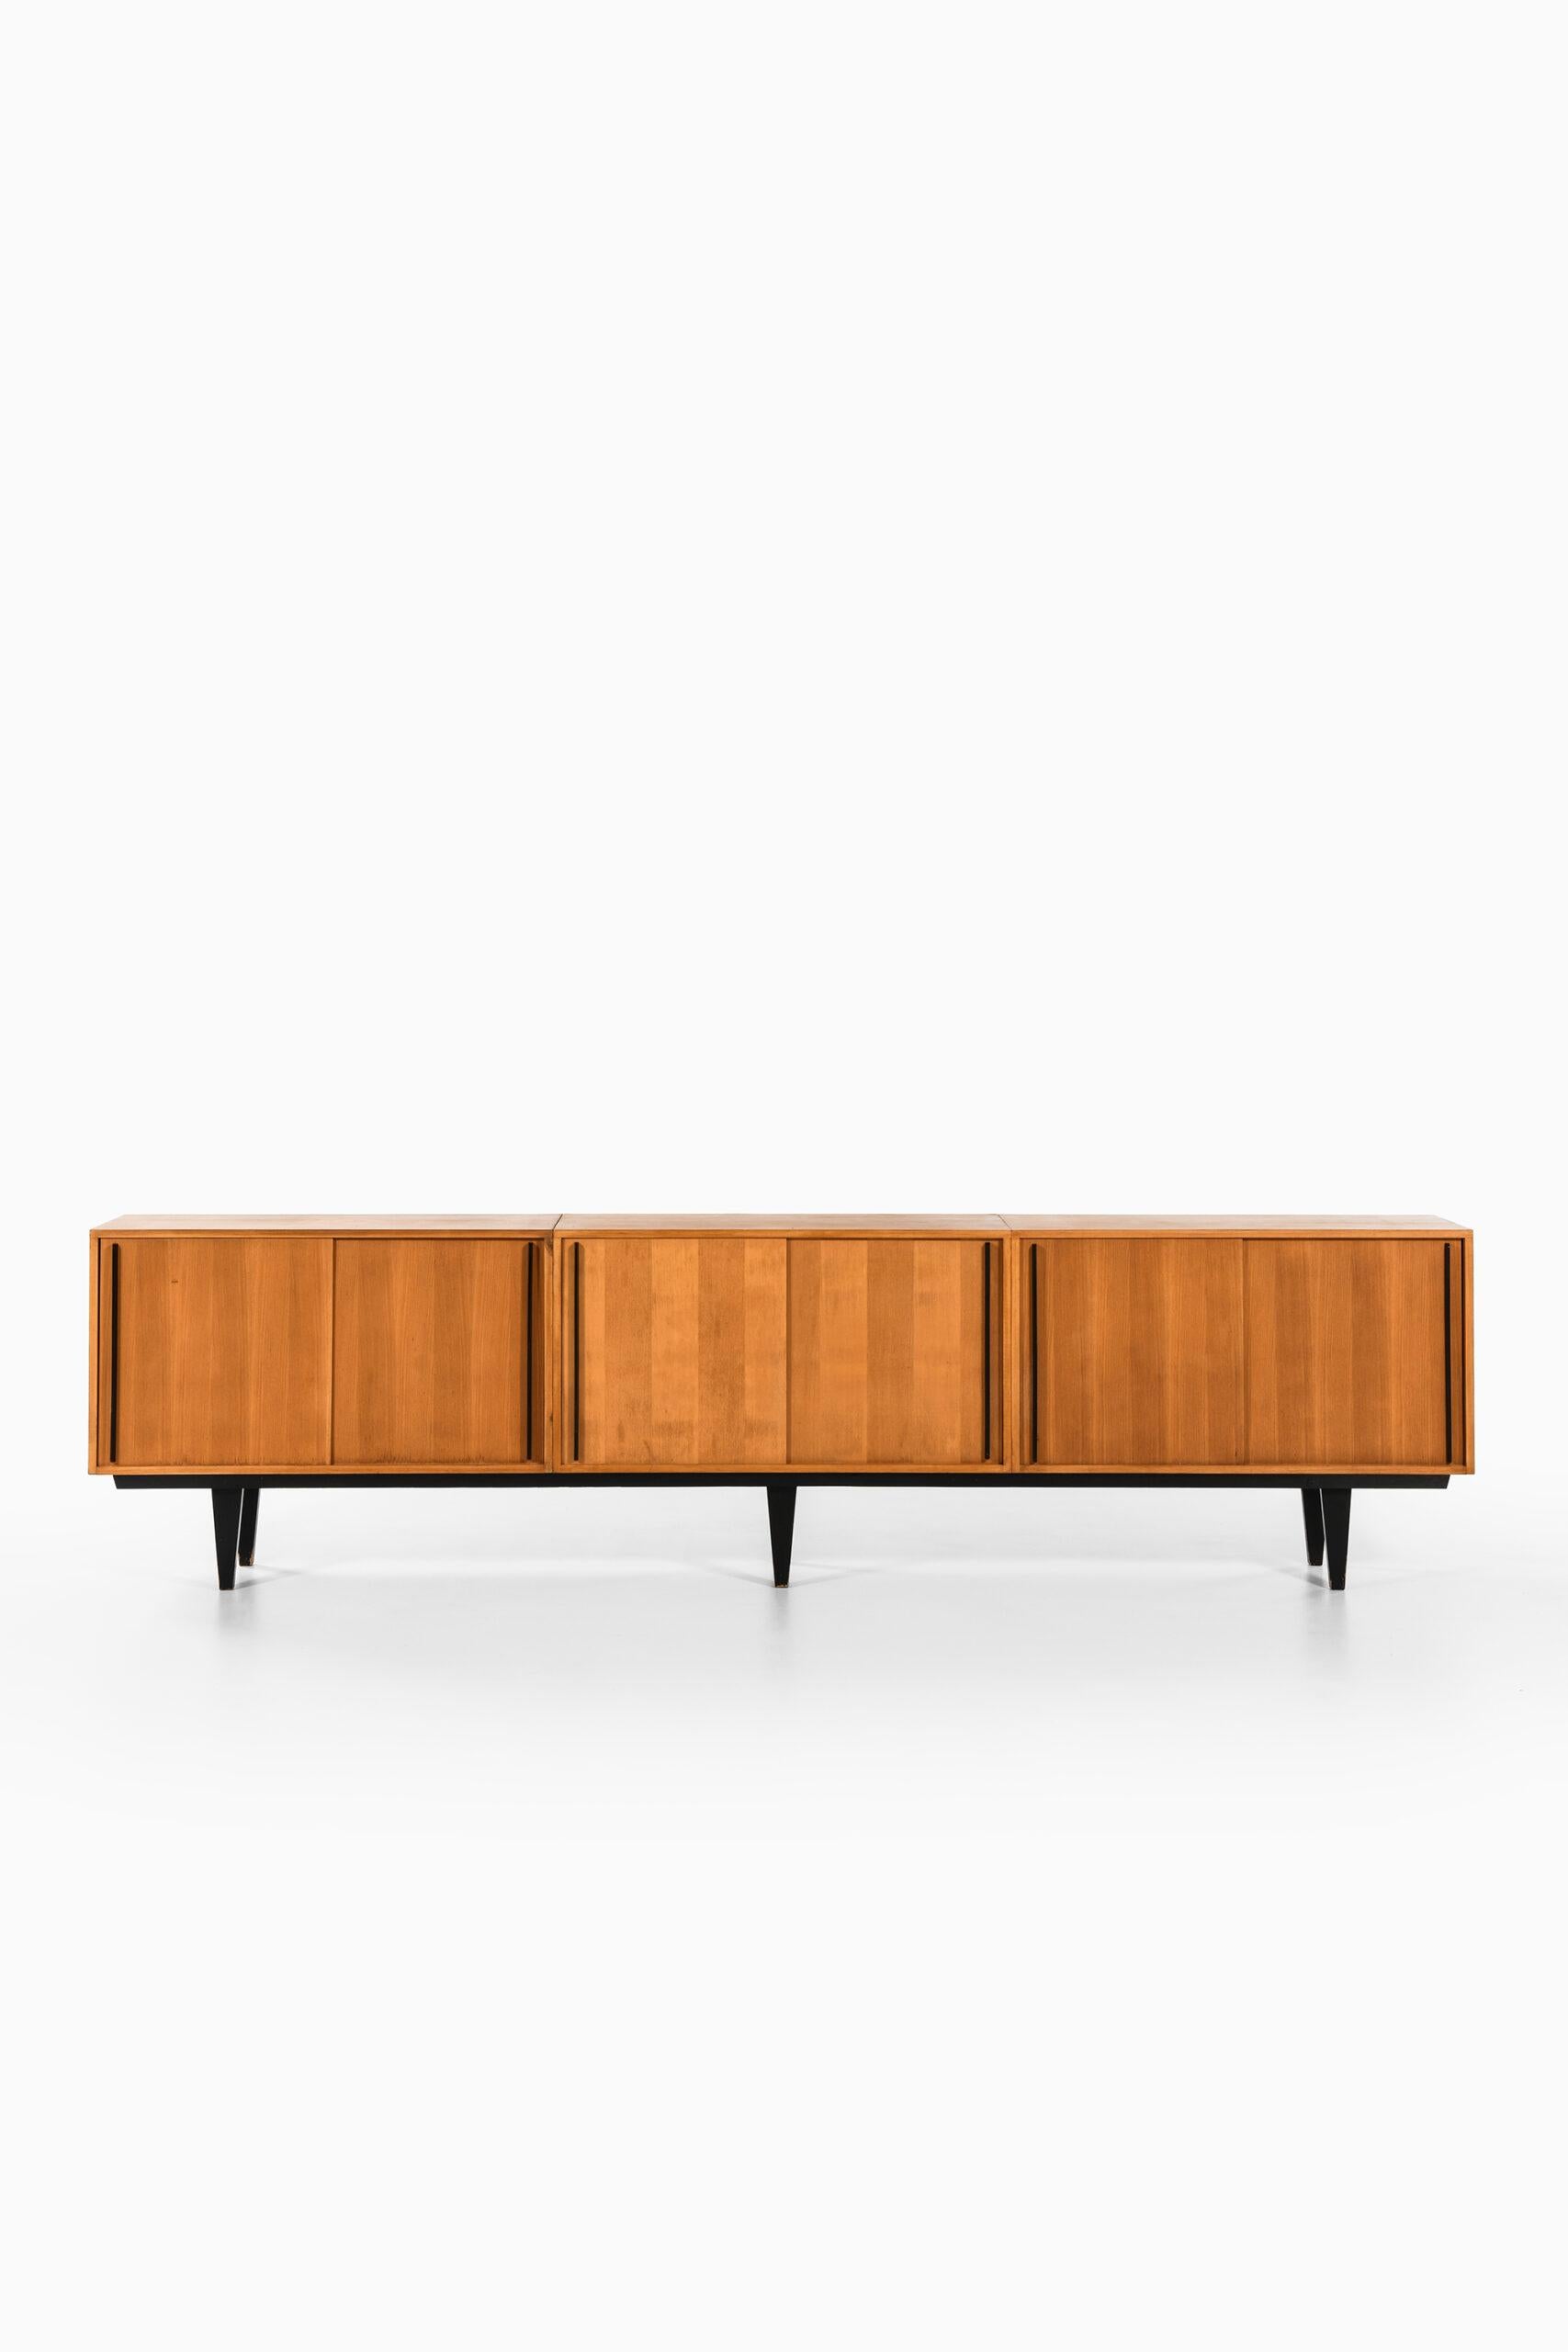 Very rare and long sideboard designed by Alfred Altherr. Produced by K.H. Frei Freba Typenmöbel in Switzerland.